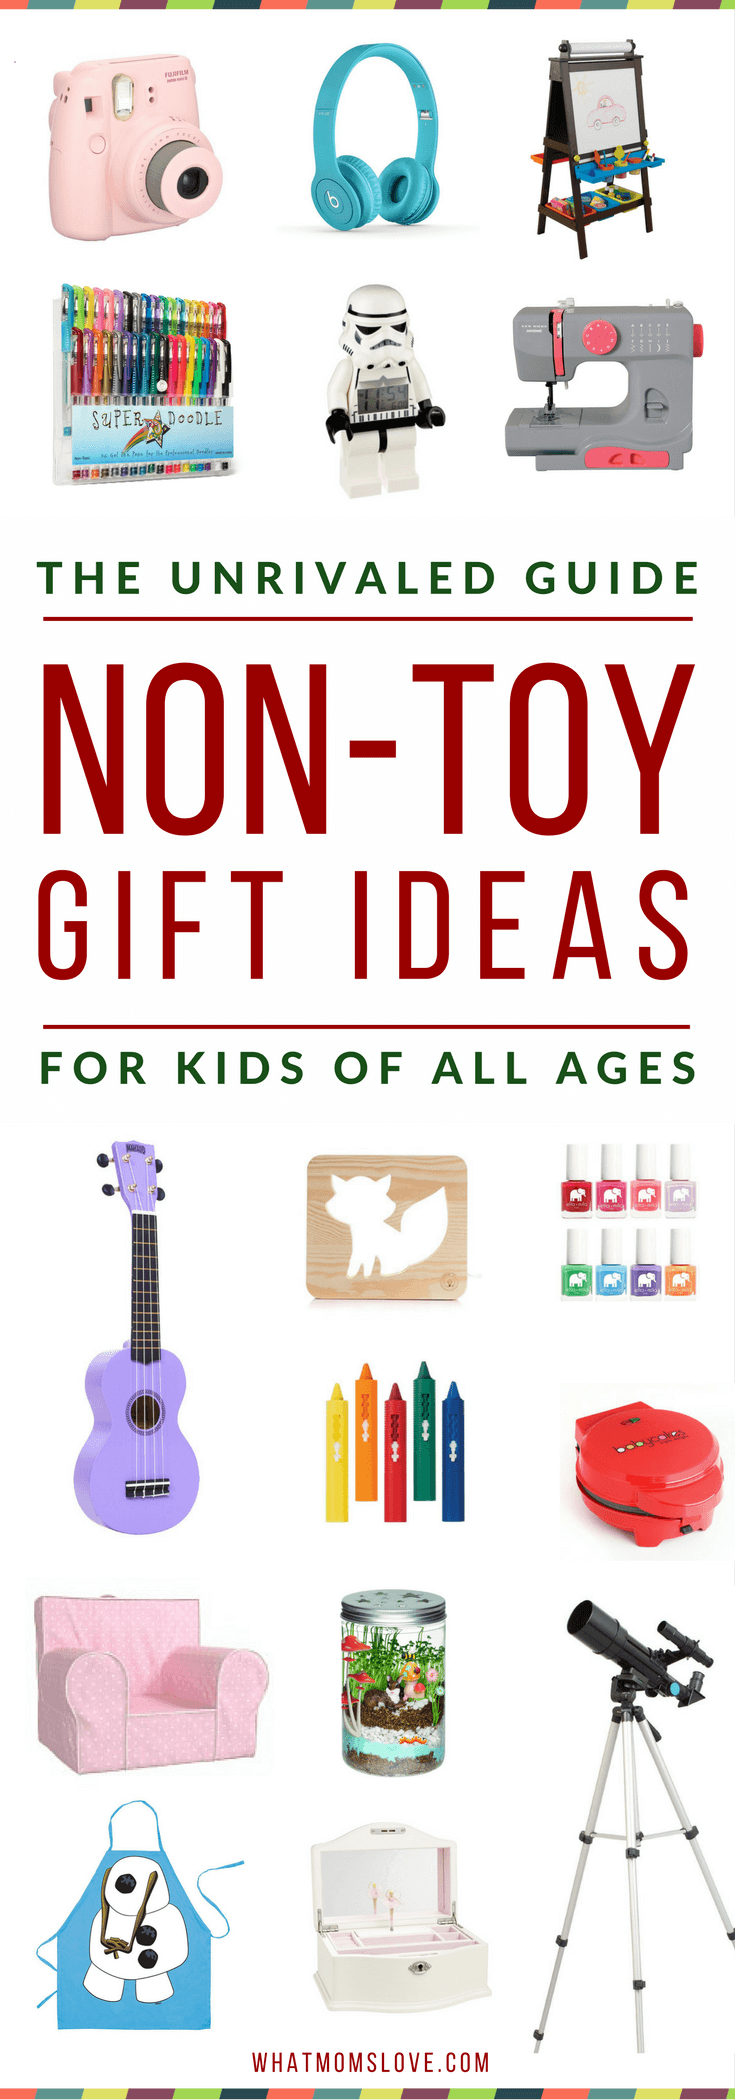 Best Non-Toy Gift Guide For Kids - Holidays Birthdays